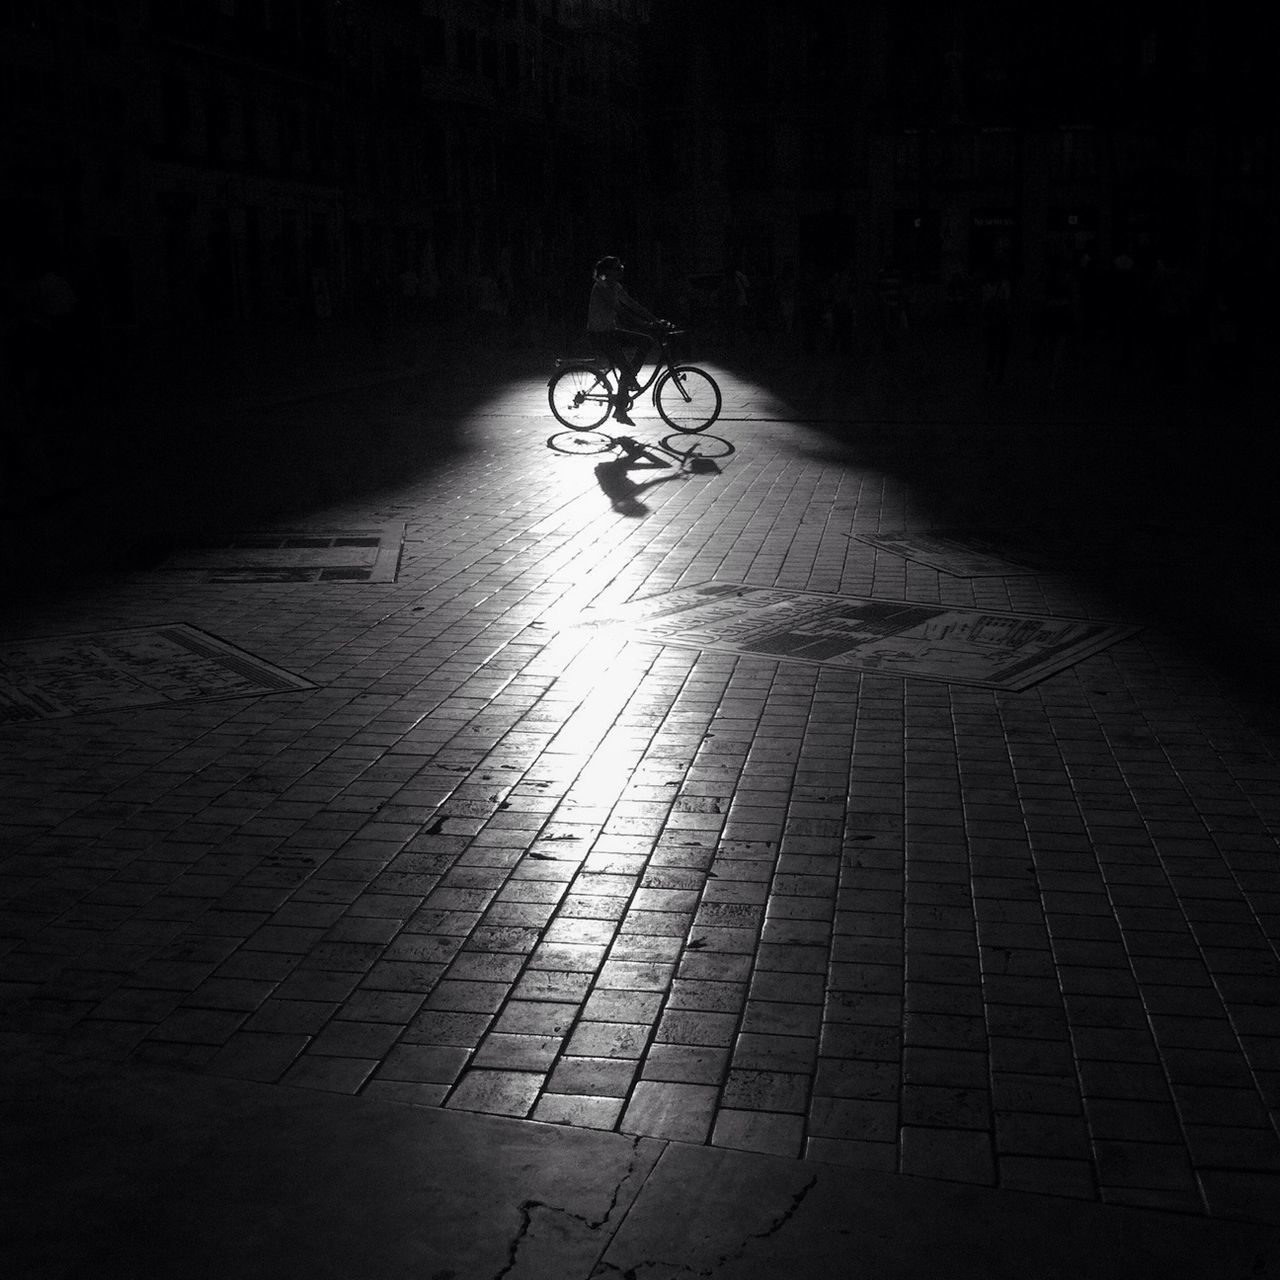 the way forward, night, shadow, street, walking, cobblestone, indoors, dark, unrecognizable person, illuminated, men, built structure, tiled floor, paving stone, sunlight, architecture, wall - building feature, bicycle